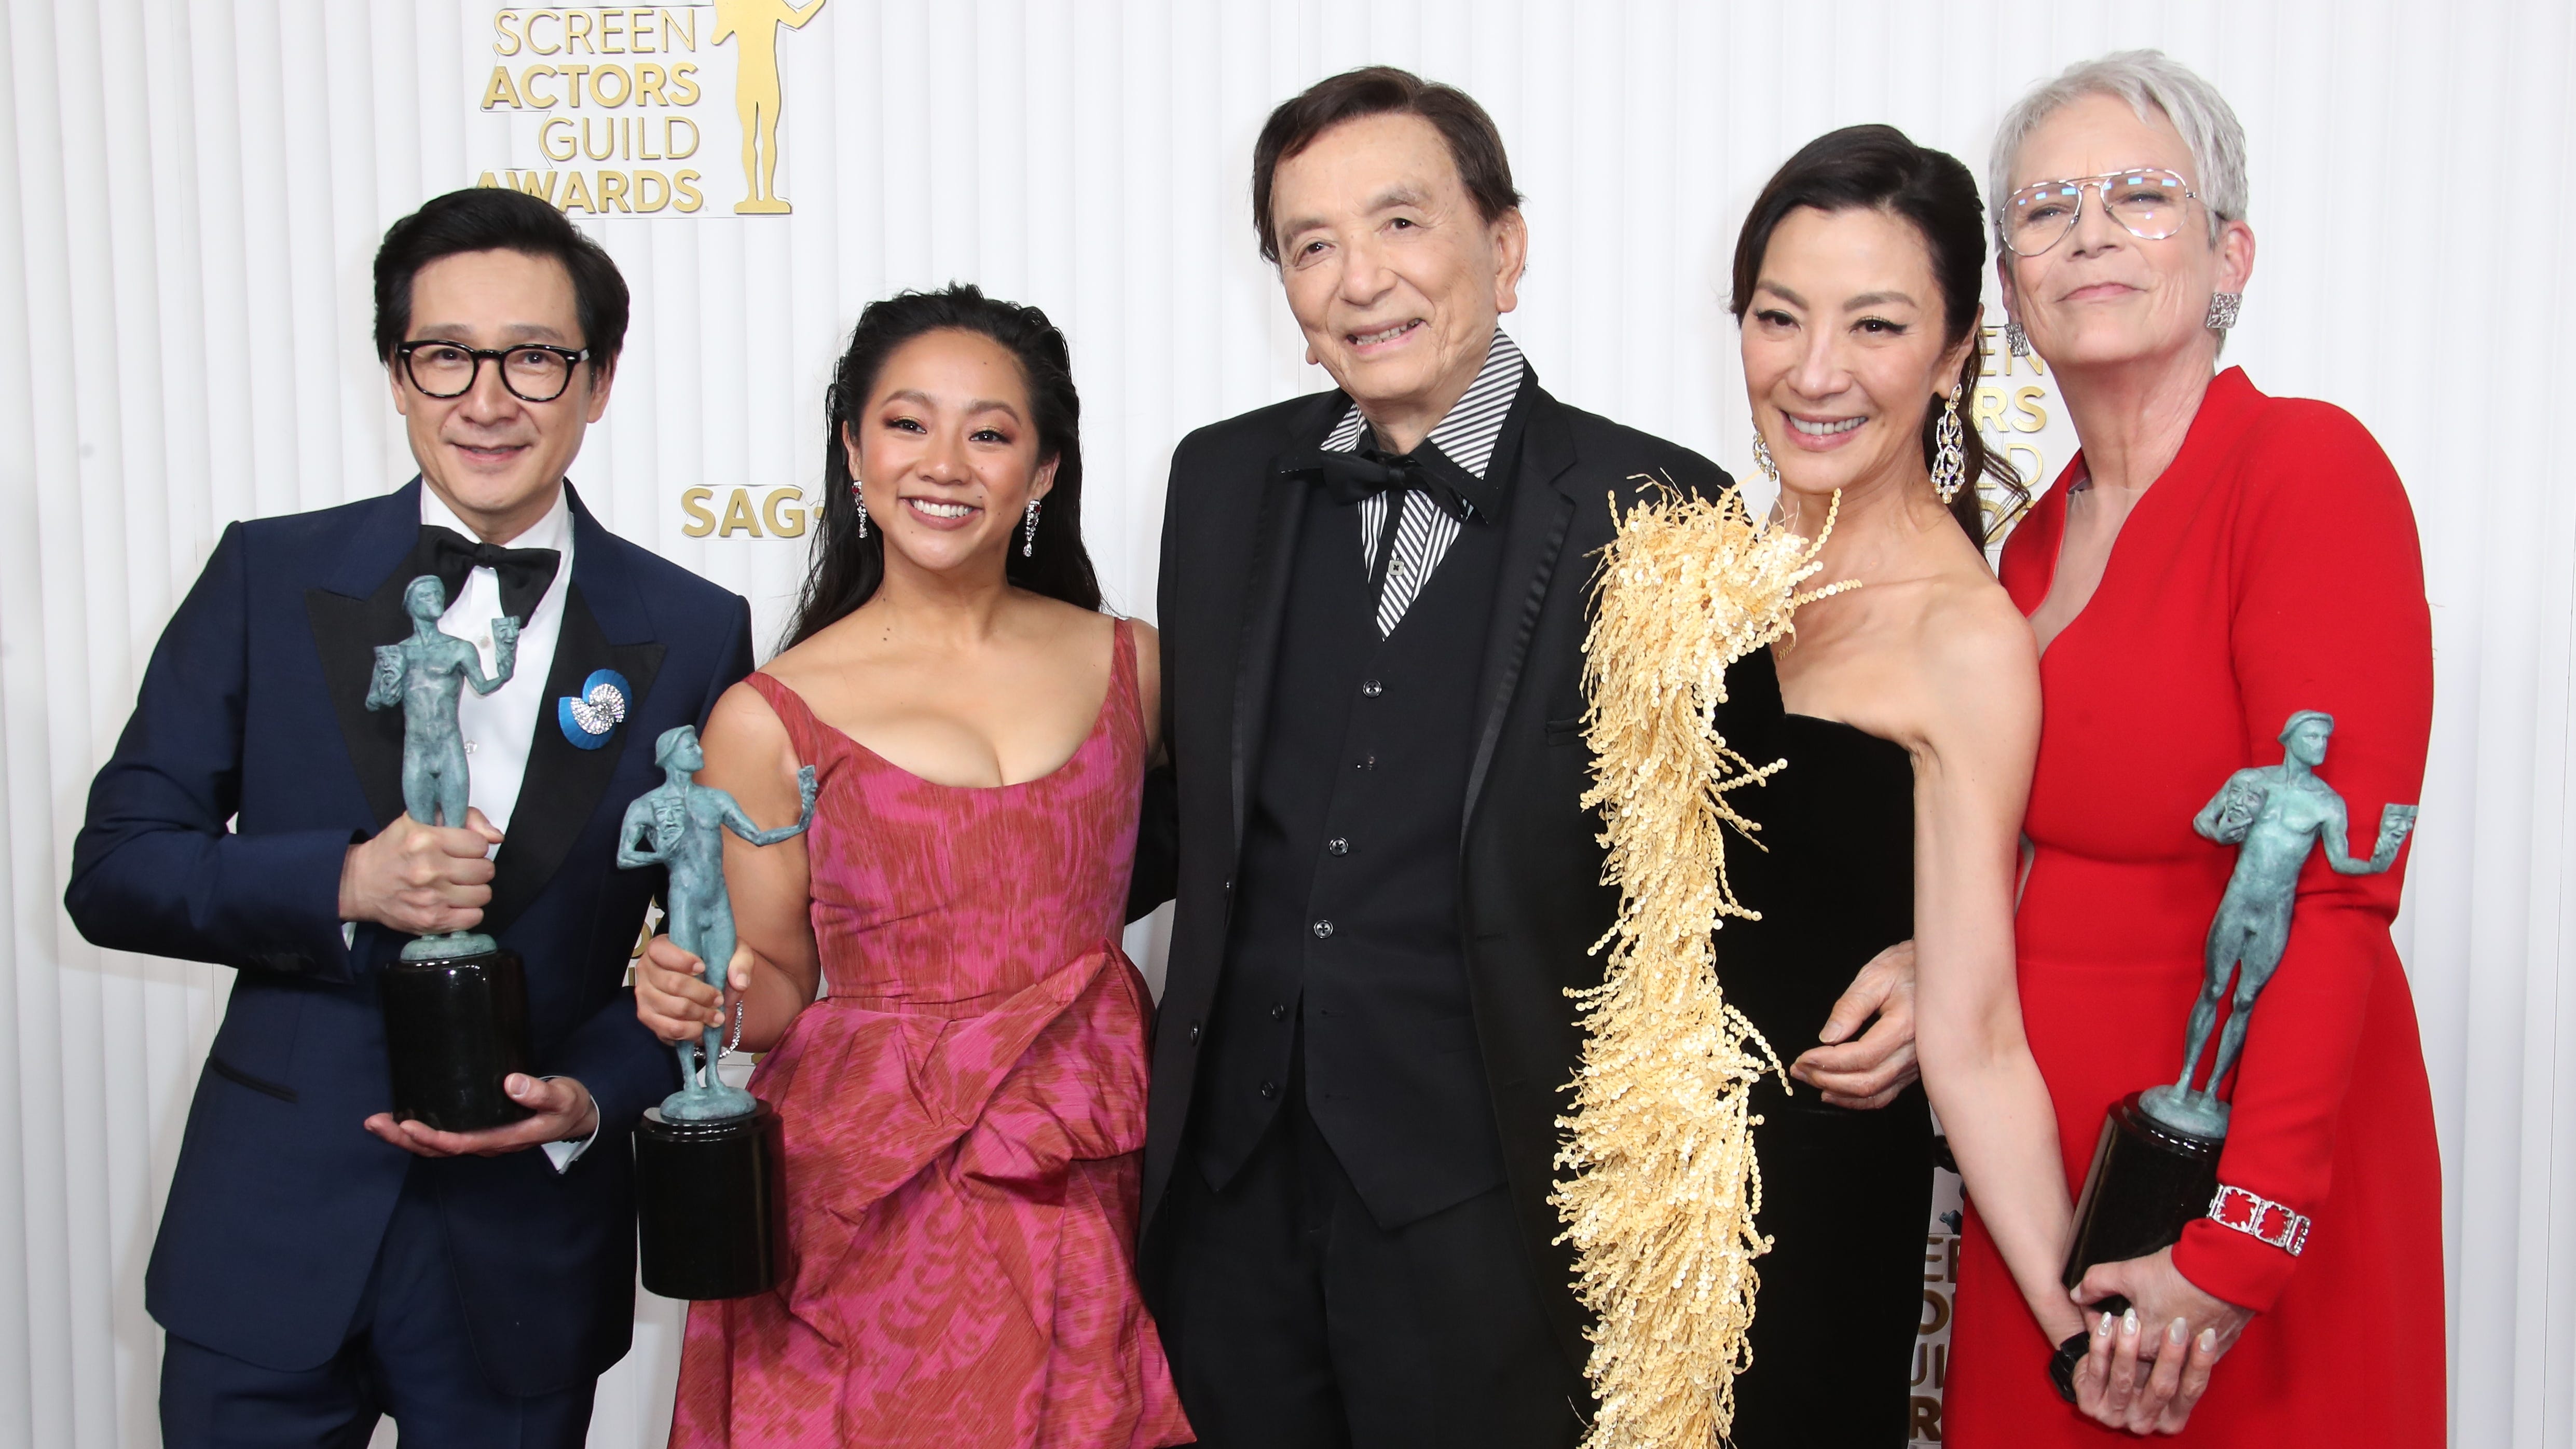 "Everything Everywhere All at Once" stars Ke Huy Quan (from left), Stephanie Hsu, James Hong, Michelle Yeoh and Jamie Lee Curtis pose with their trophies for best cast at the Screen Actors Guild Awards.